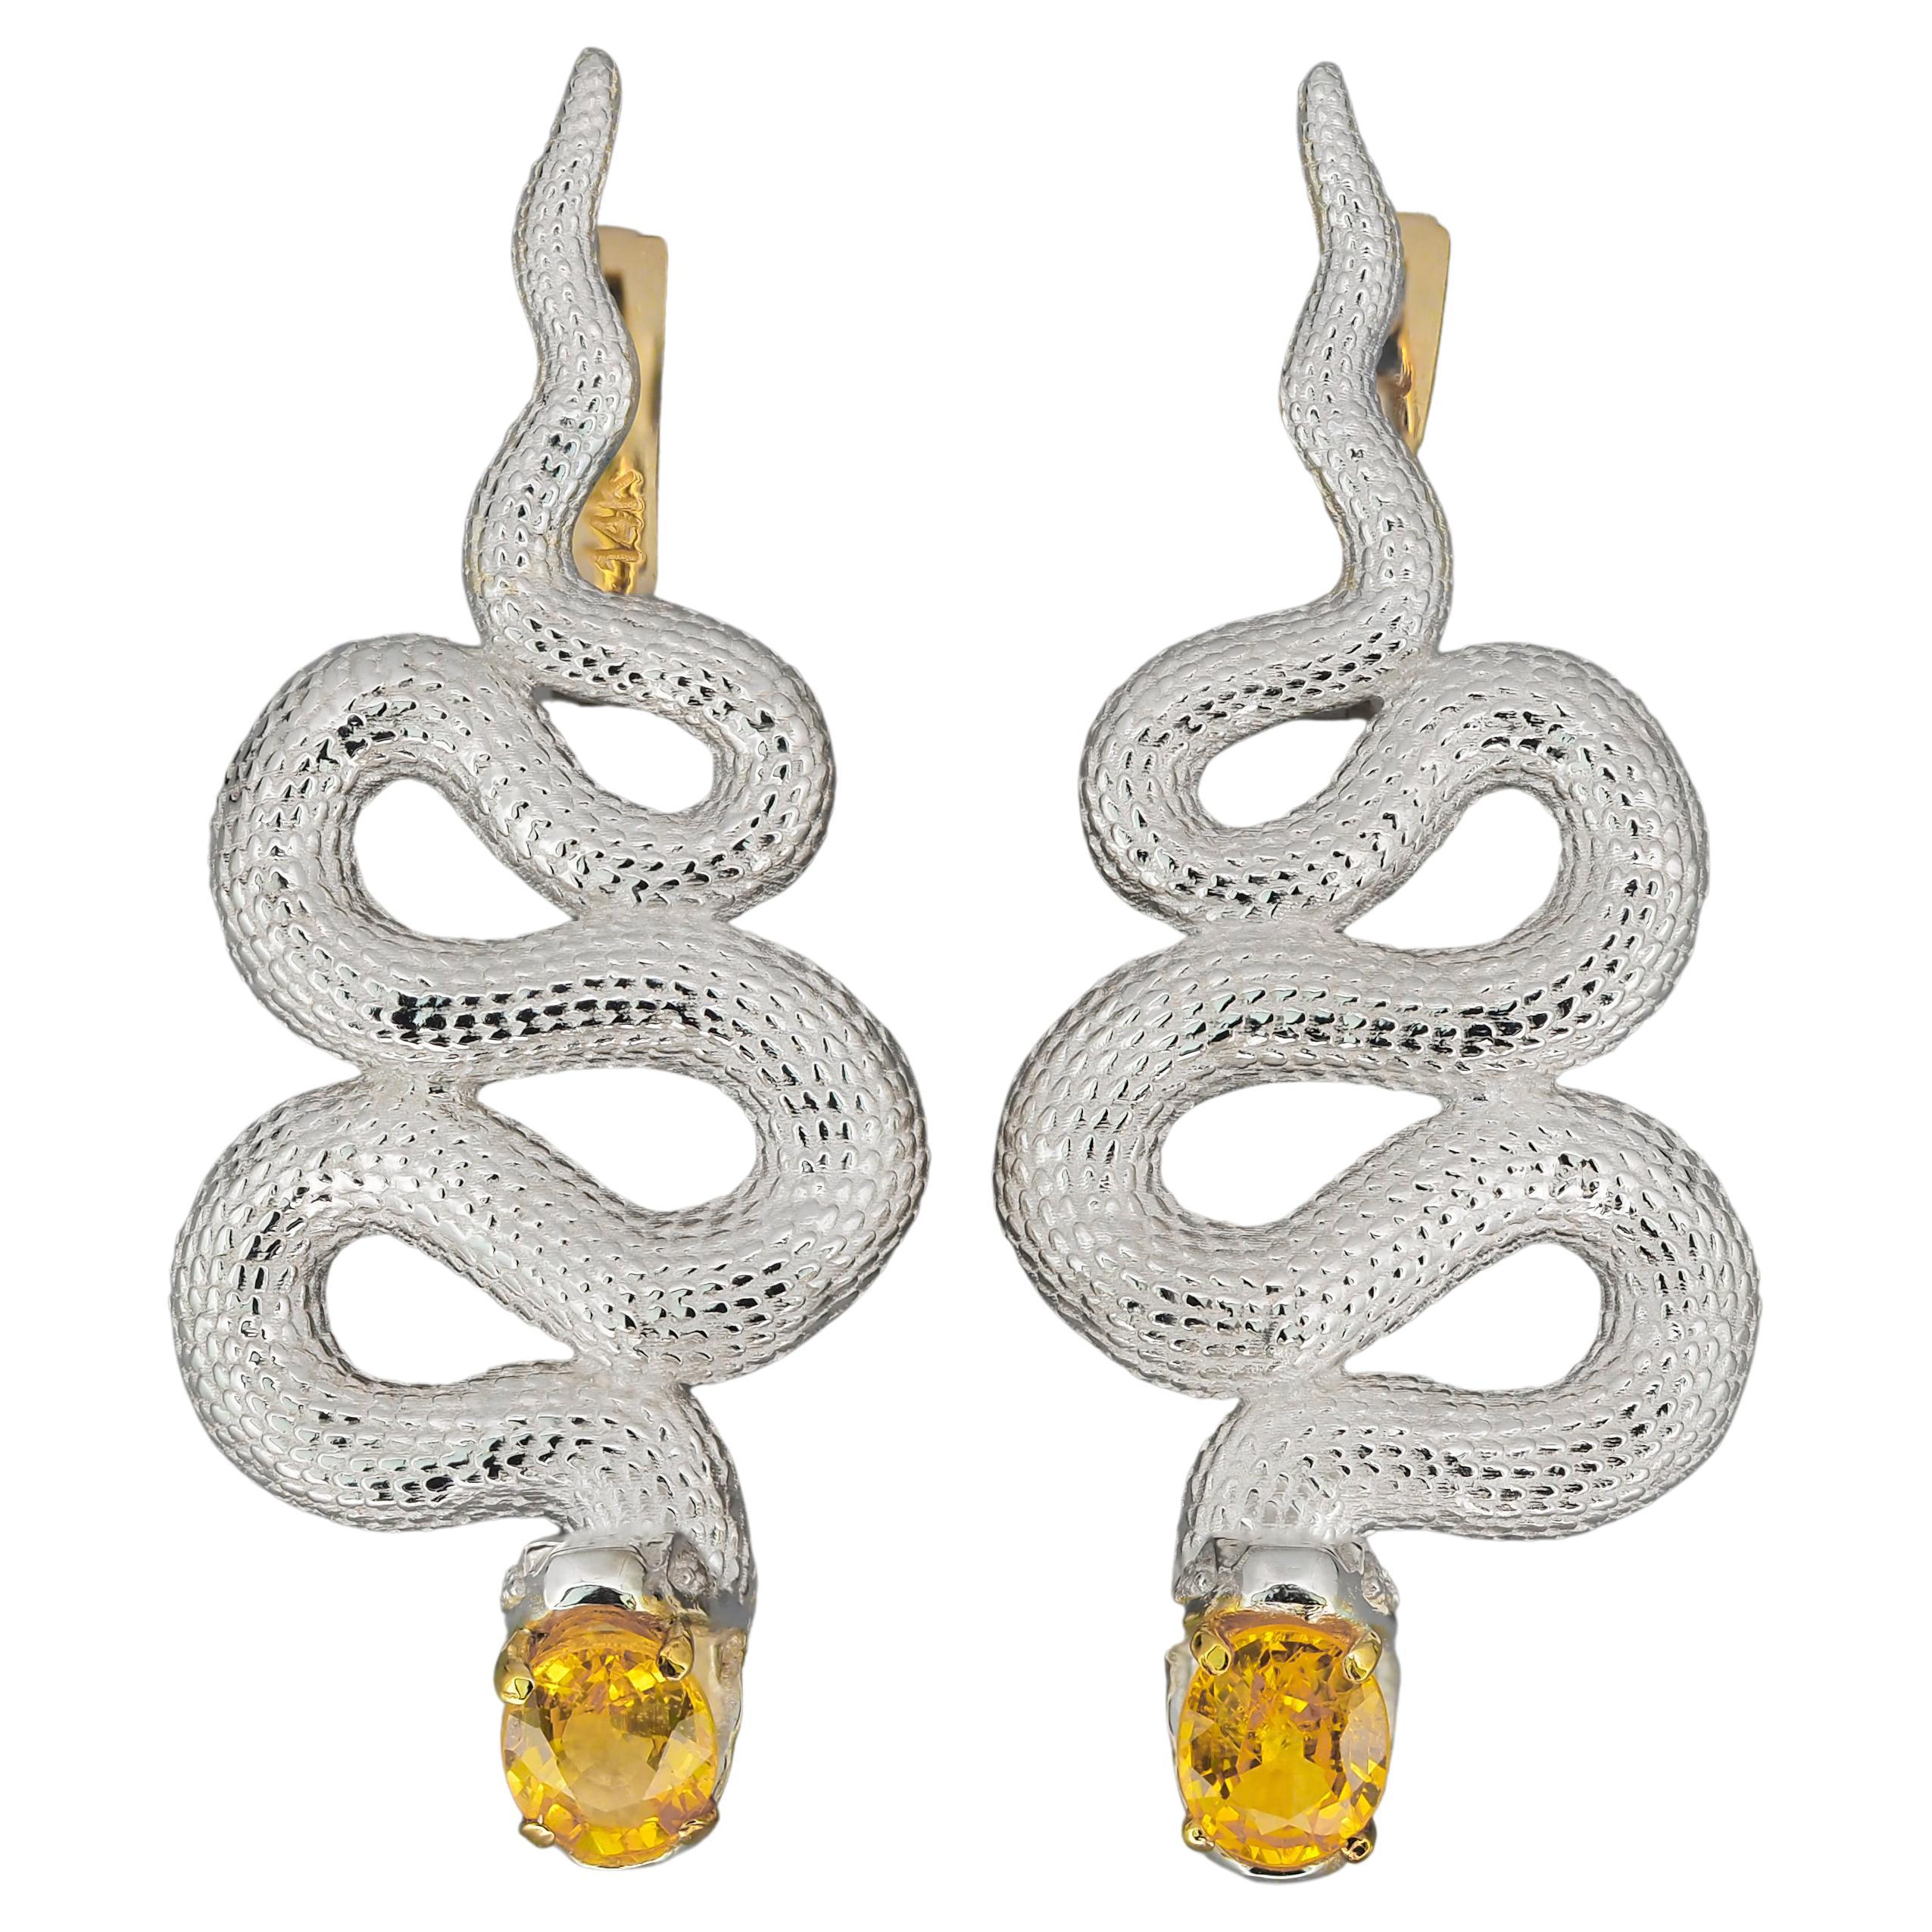 Massive Snake Earrings with Sapphires in Opened Mouth and Diamonds in Eyes For Sale